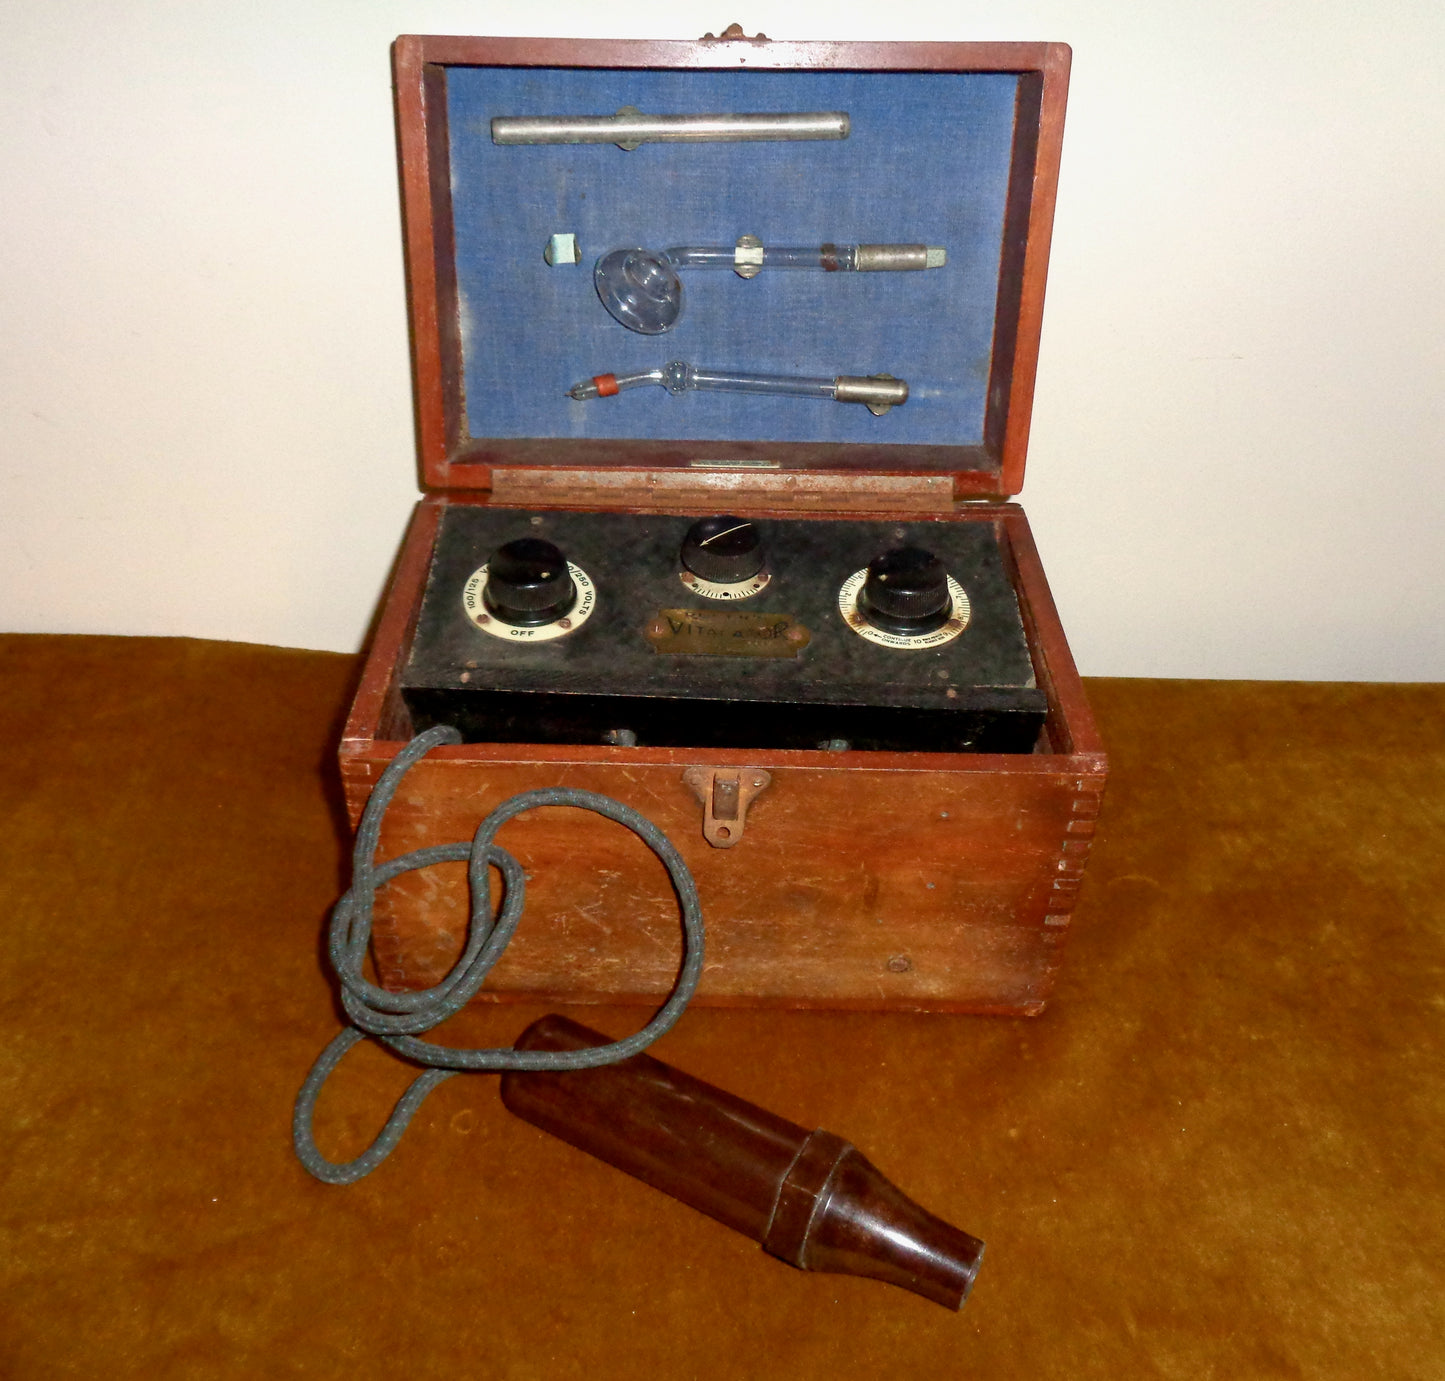 1930s Roger's Violet Ray Home Vitalator Antique Medical Electrotherapy Appliance